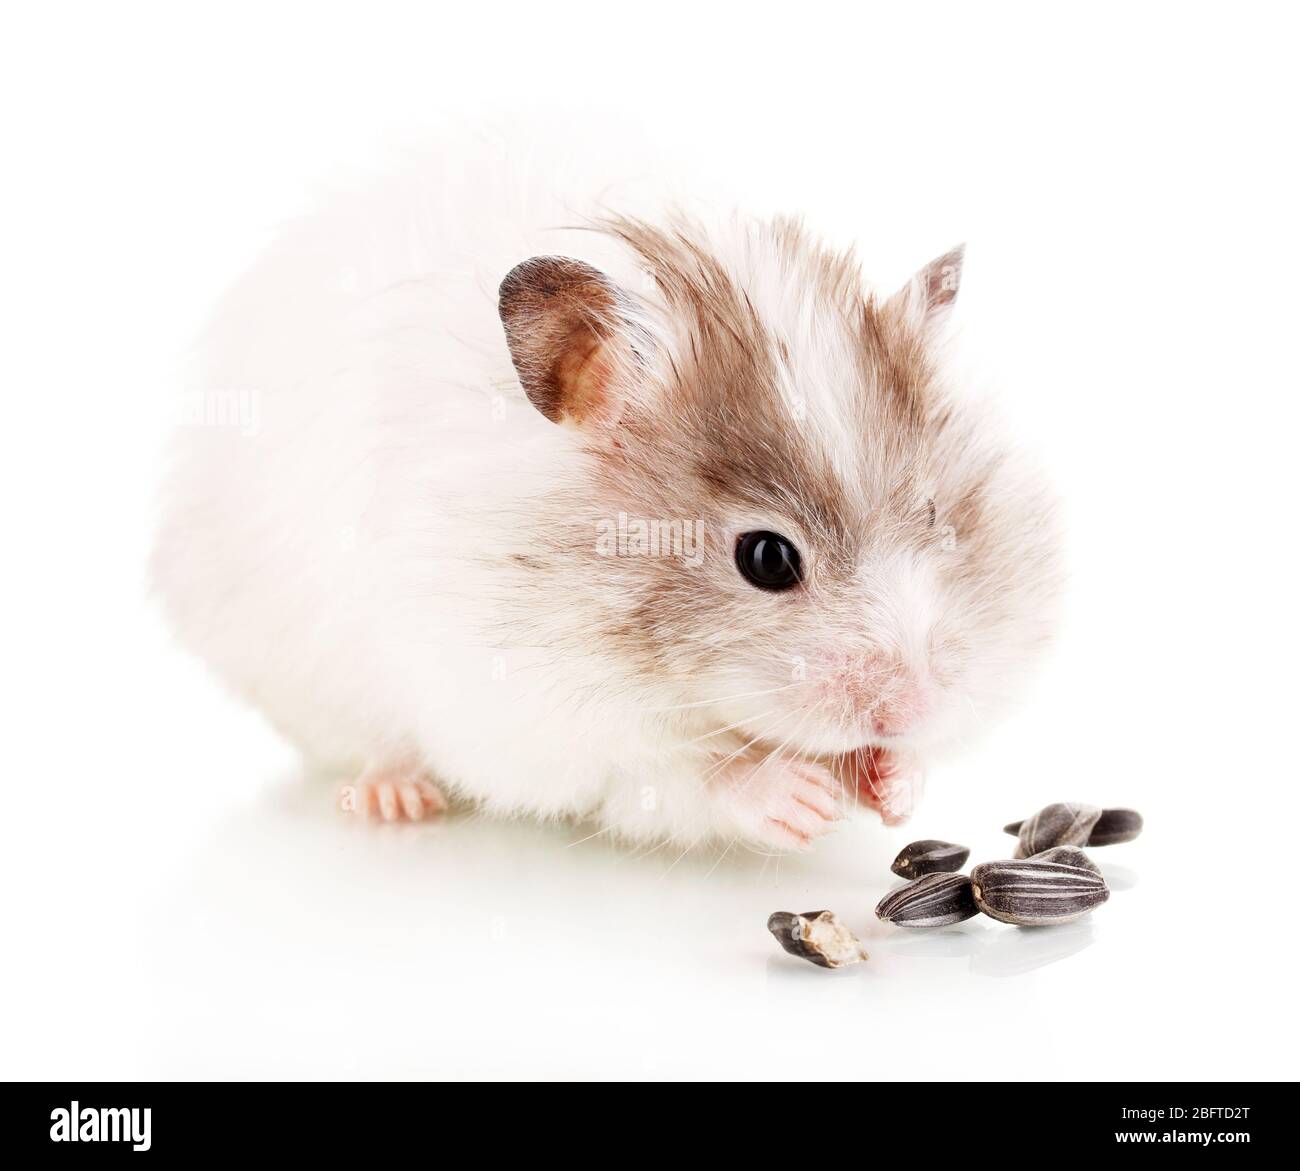 Cute hamster eating sunflower seeds isolated Stock Photo